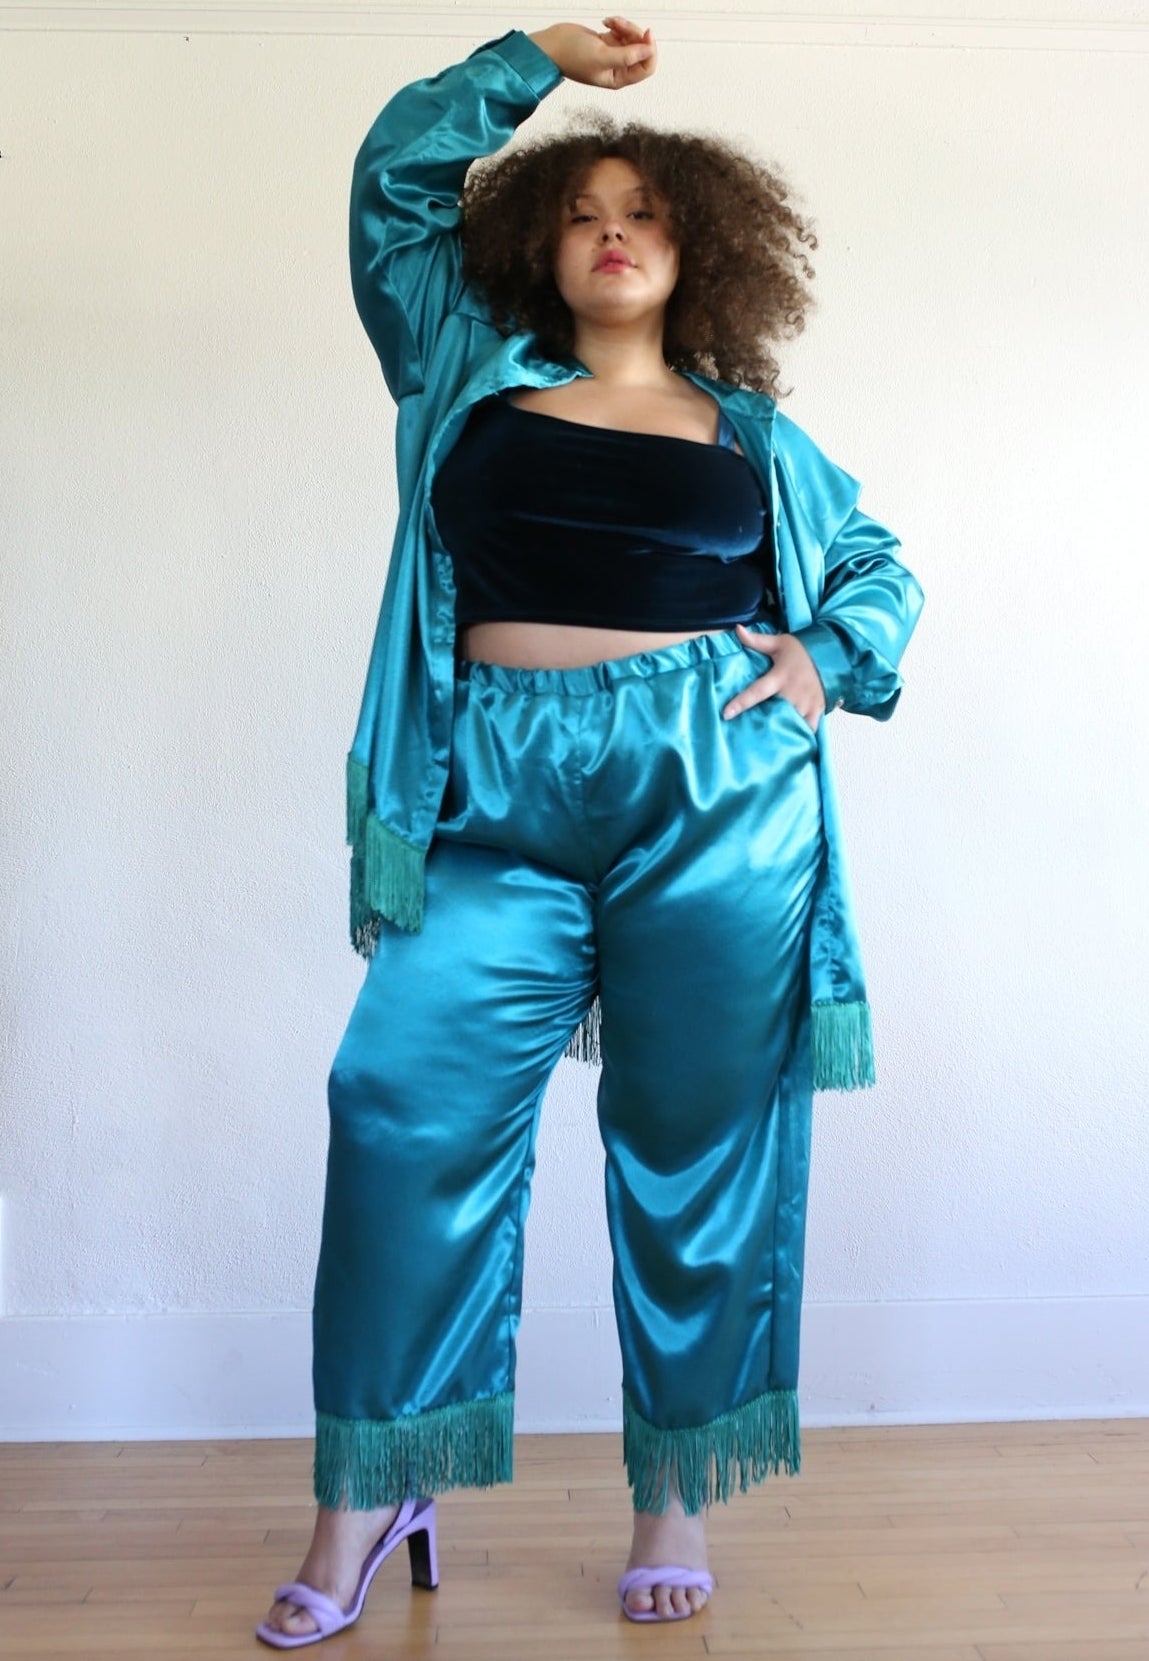 A model posing in teal pants with fringe